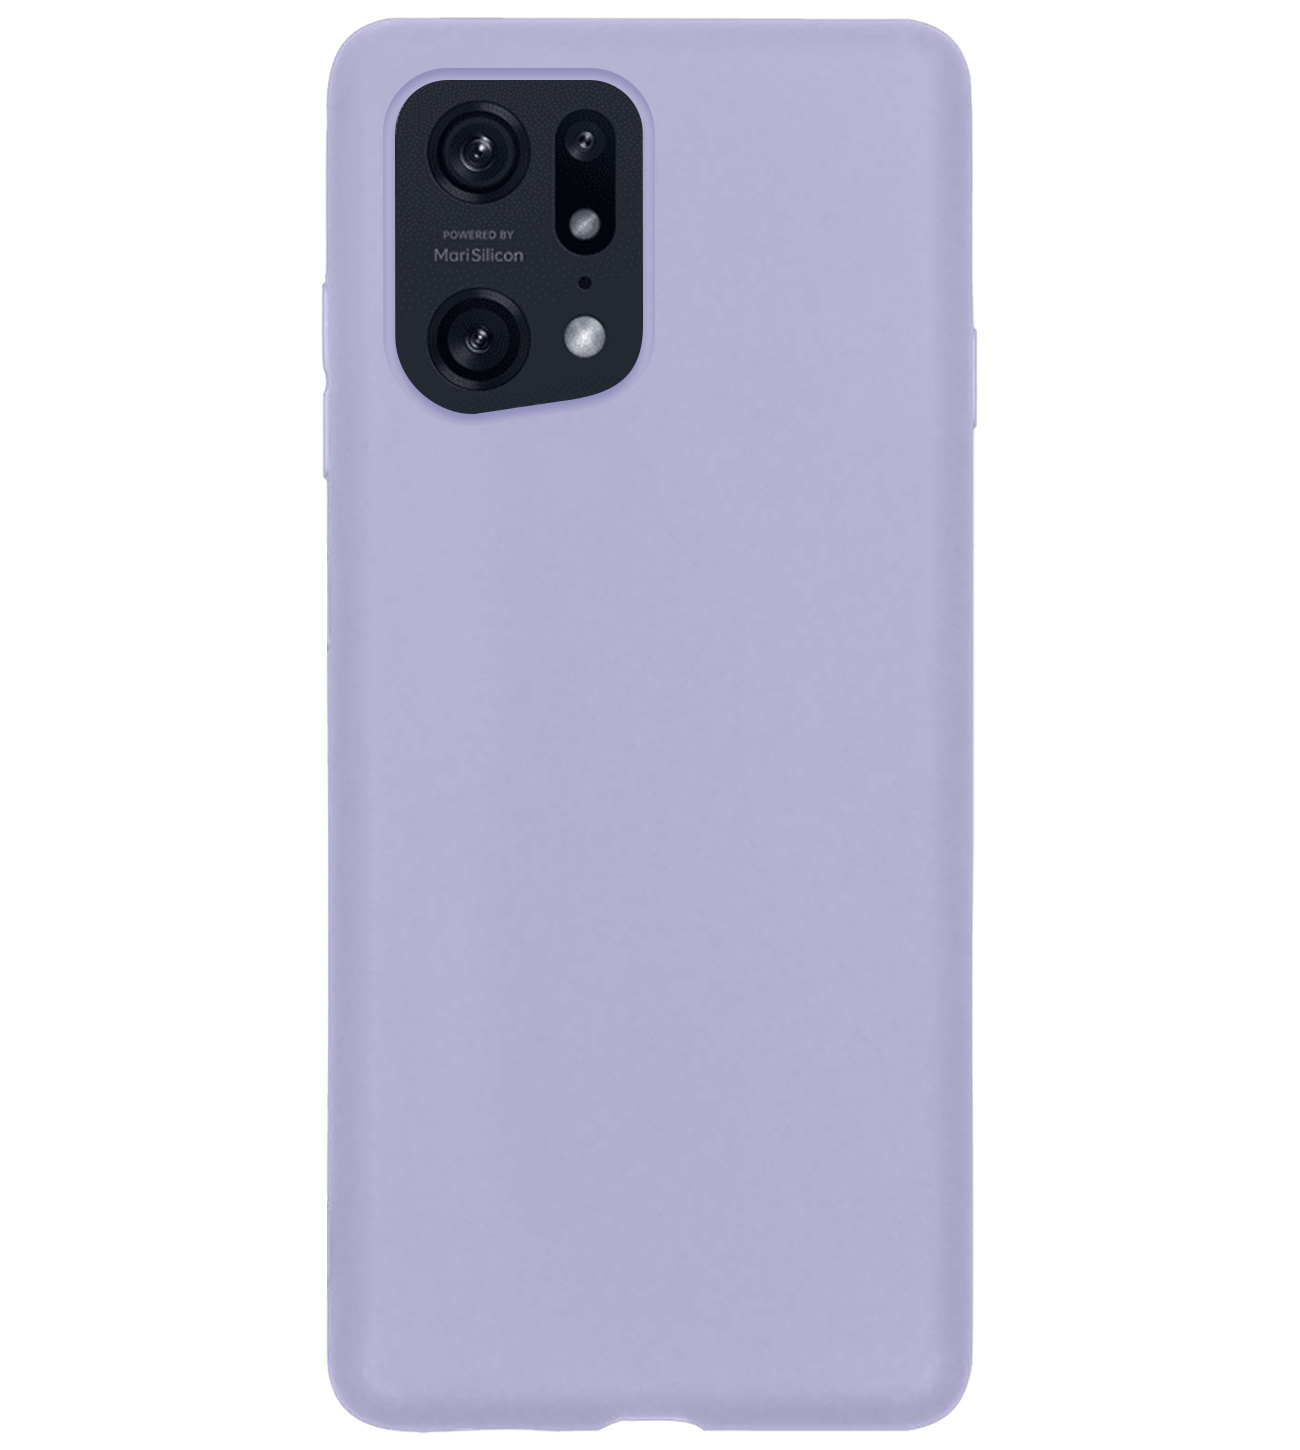 BASEY. OPPO Find X5 Pro Hoesje Siliconen Back Cover Case Met 2x Screenprotector - OPPO Find X5 Pro Hoes Silicone Case Hoesje - Lila